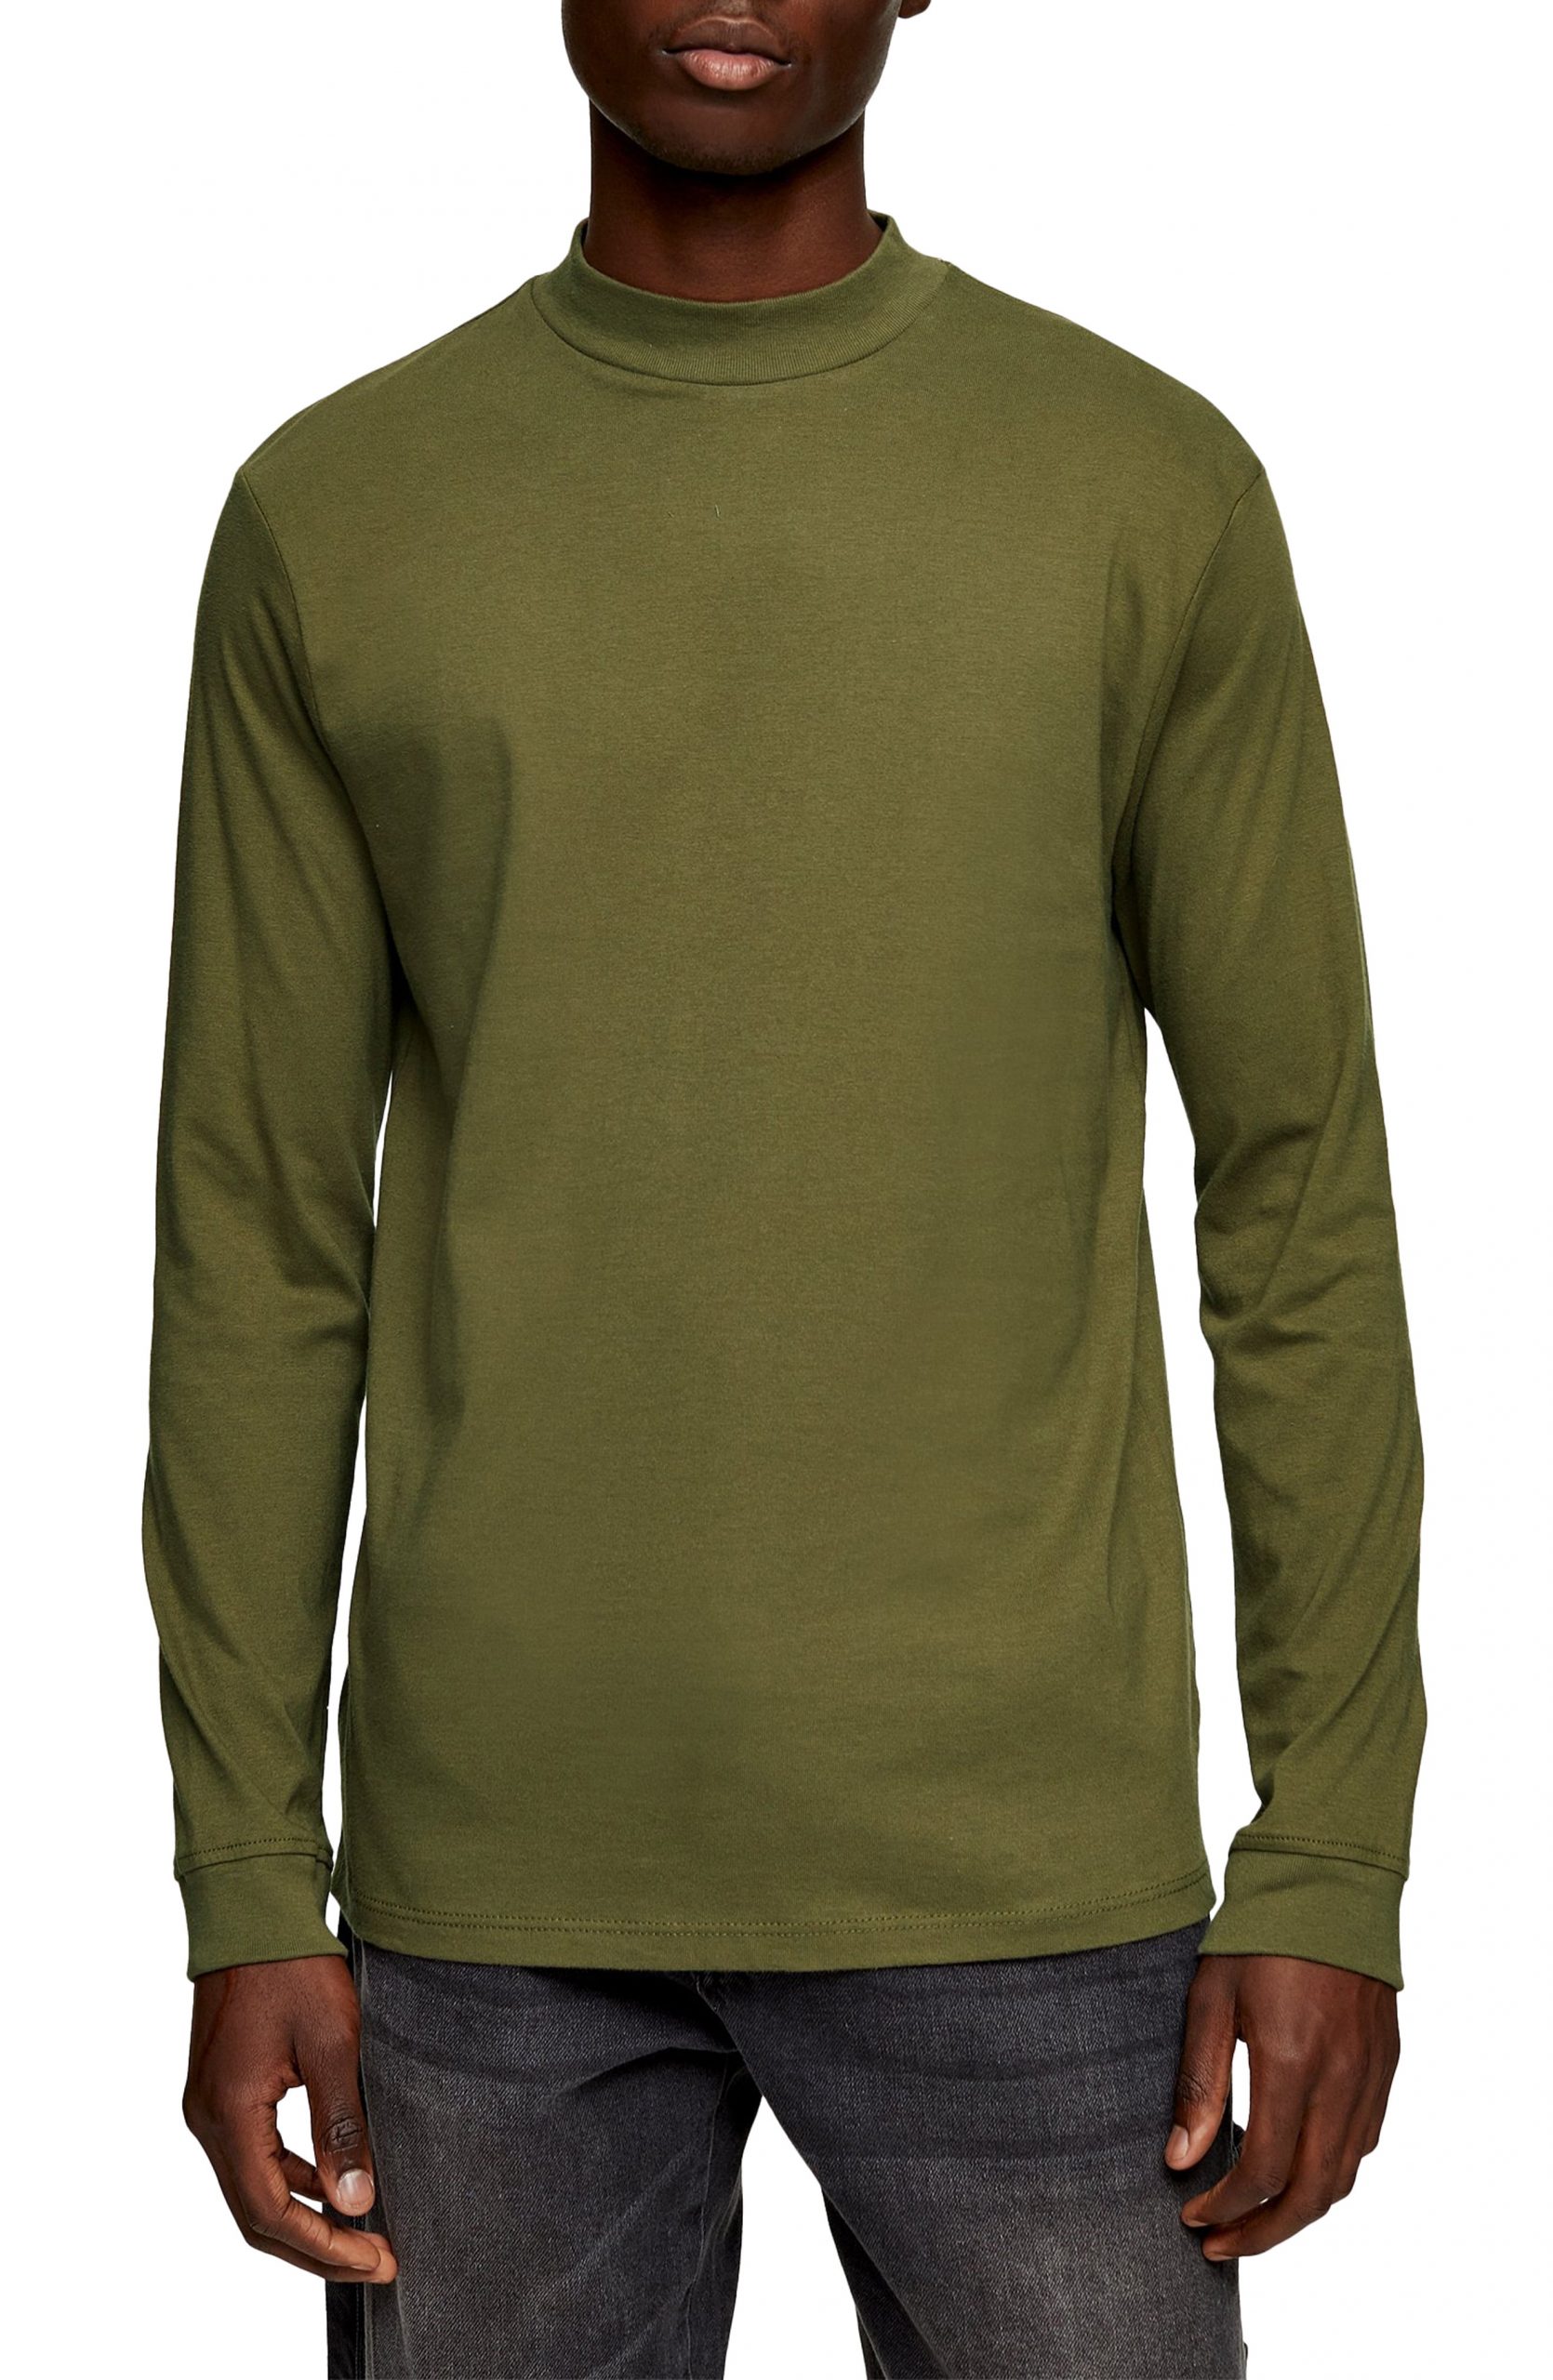 Download Men's Topman Mock Neck Long Sleeve T-Shirt, Size Large - Green | The Fashionisto